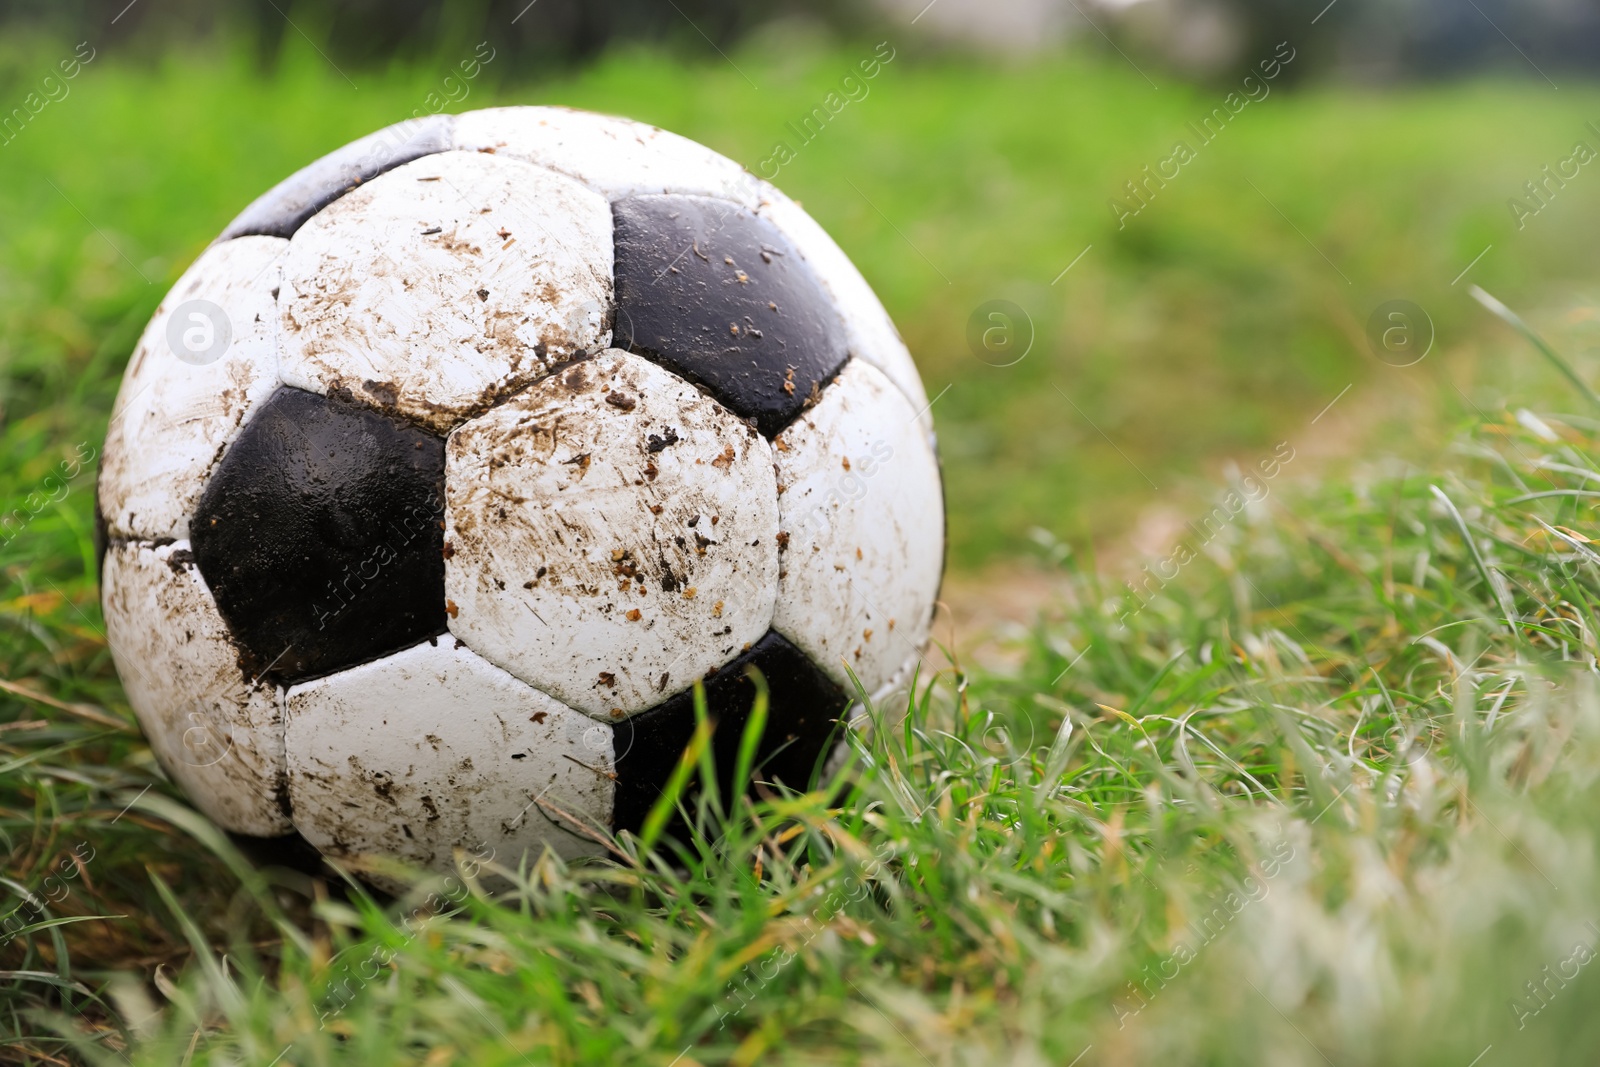 Photo of Dirty soccer ball on green grass outdoors, closeup. Space for text